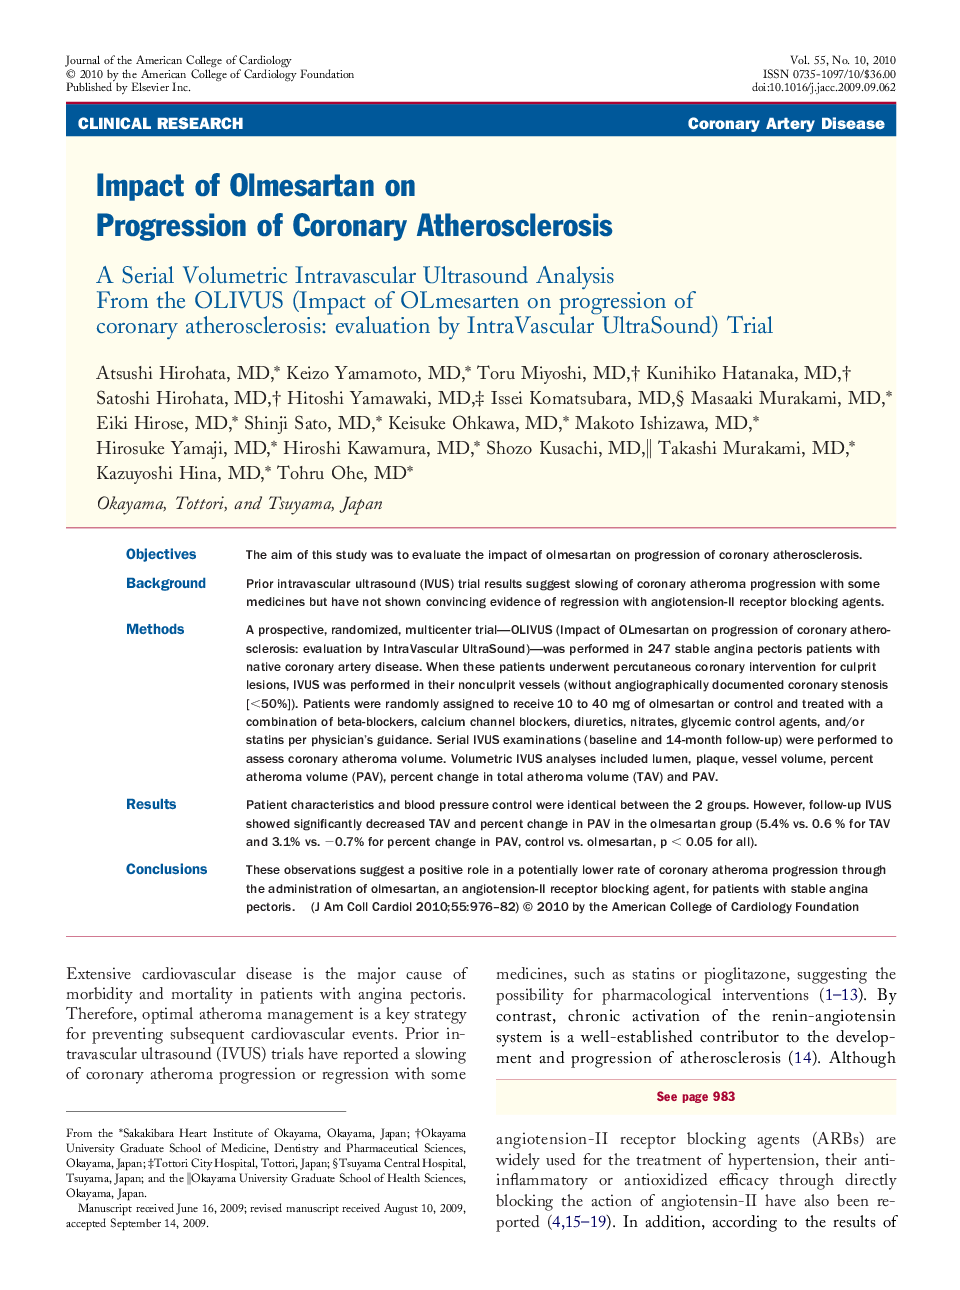 Impact of Olmesartan on Progression of Coronary Atherosclerosis: A Serial Volumetric Intravascular Ultrasound Analysis From the OLIVUS (Impact of OLmesarten on progression of coronary atherosclerosis: evaluation by IntraVascular UltraSound) Trial